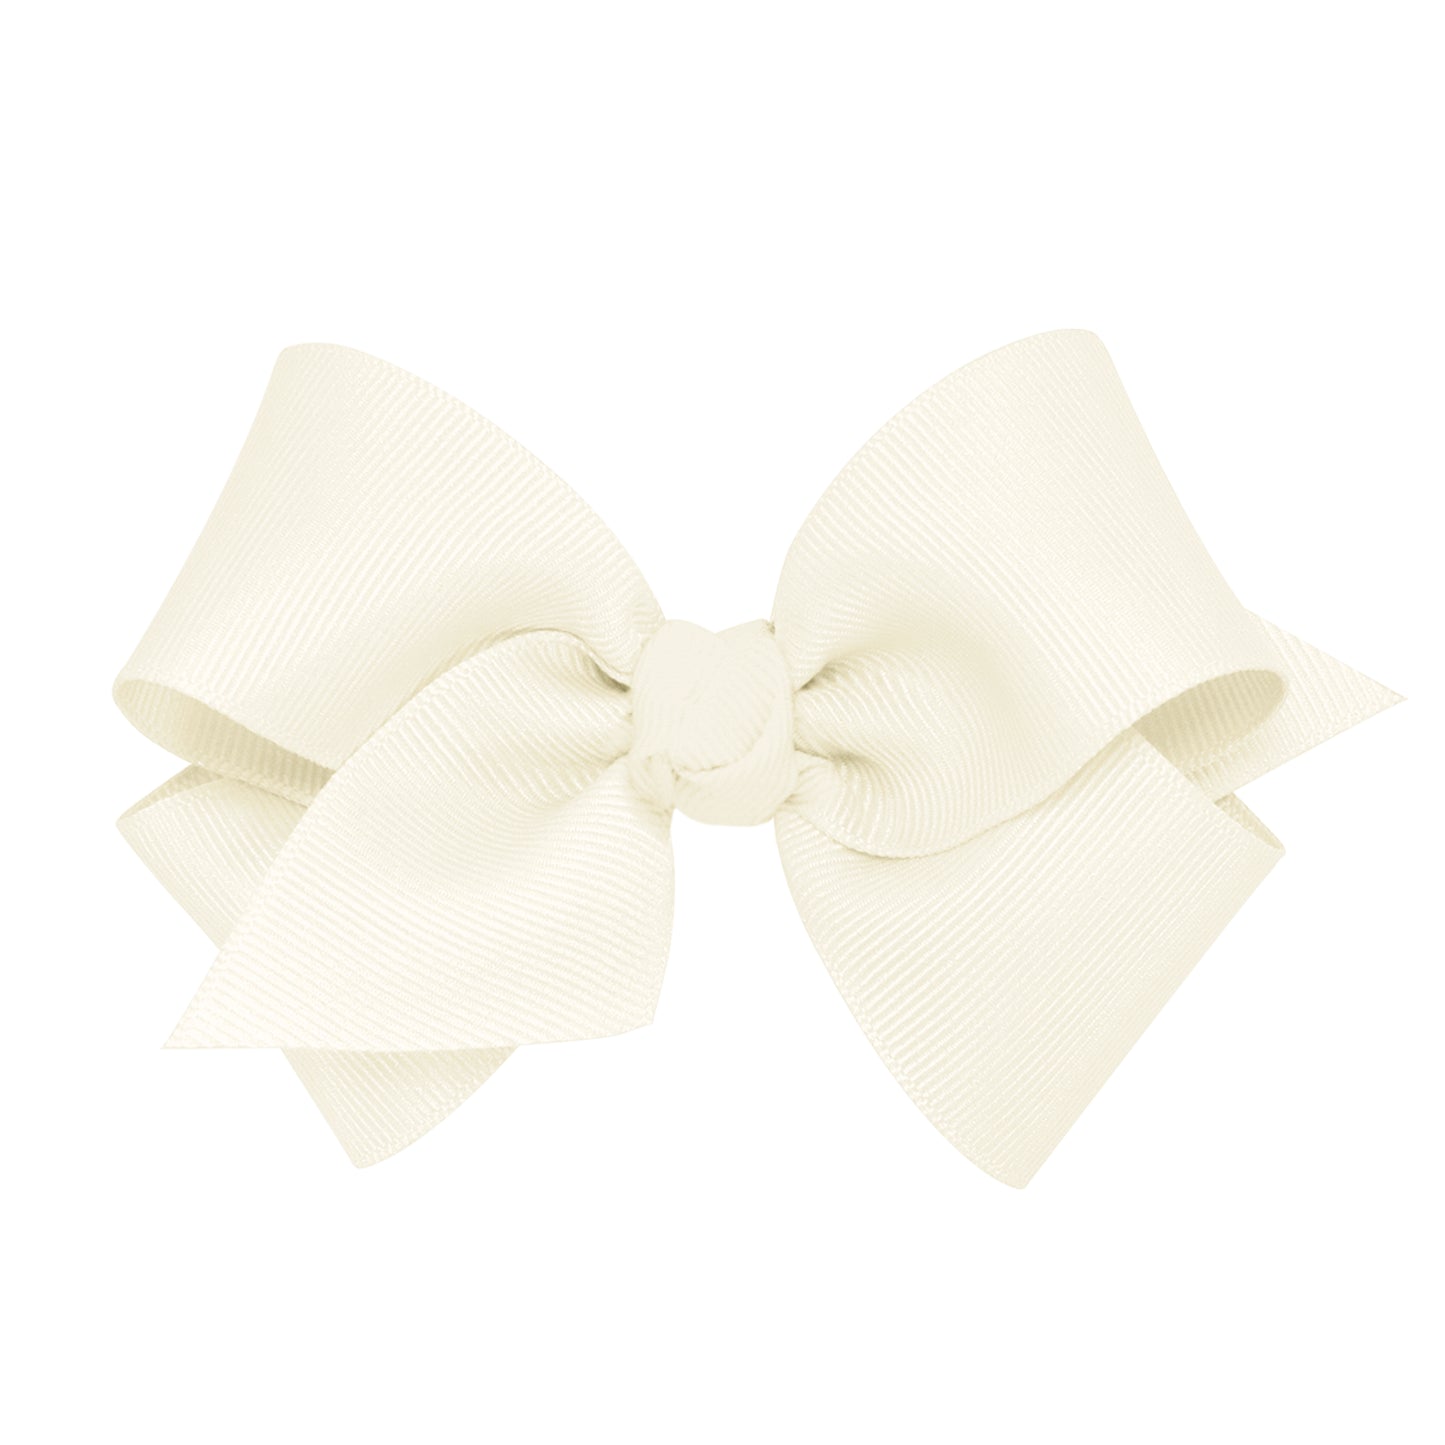 Small Grosgrain Hair Bow with Center Knot - Antique White